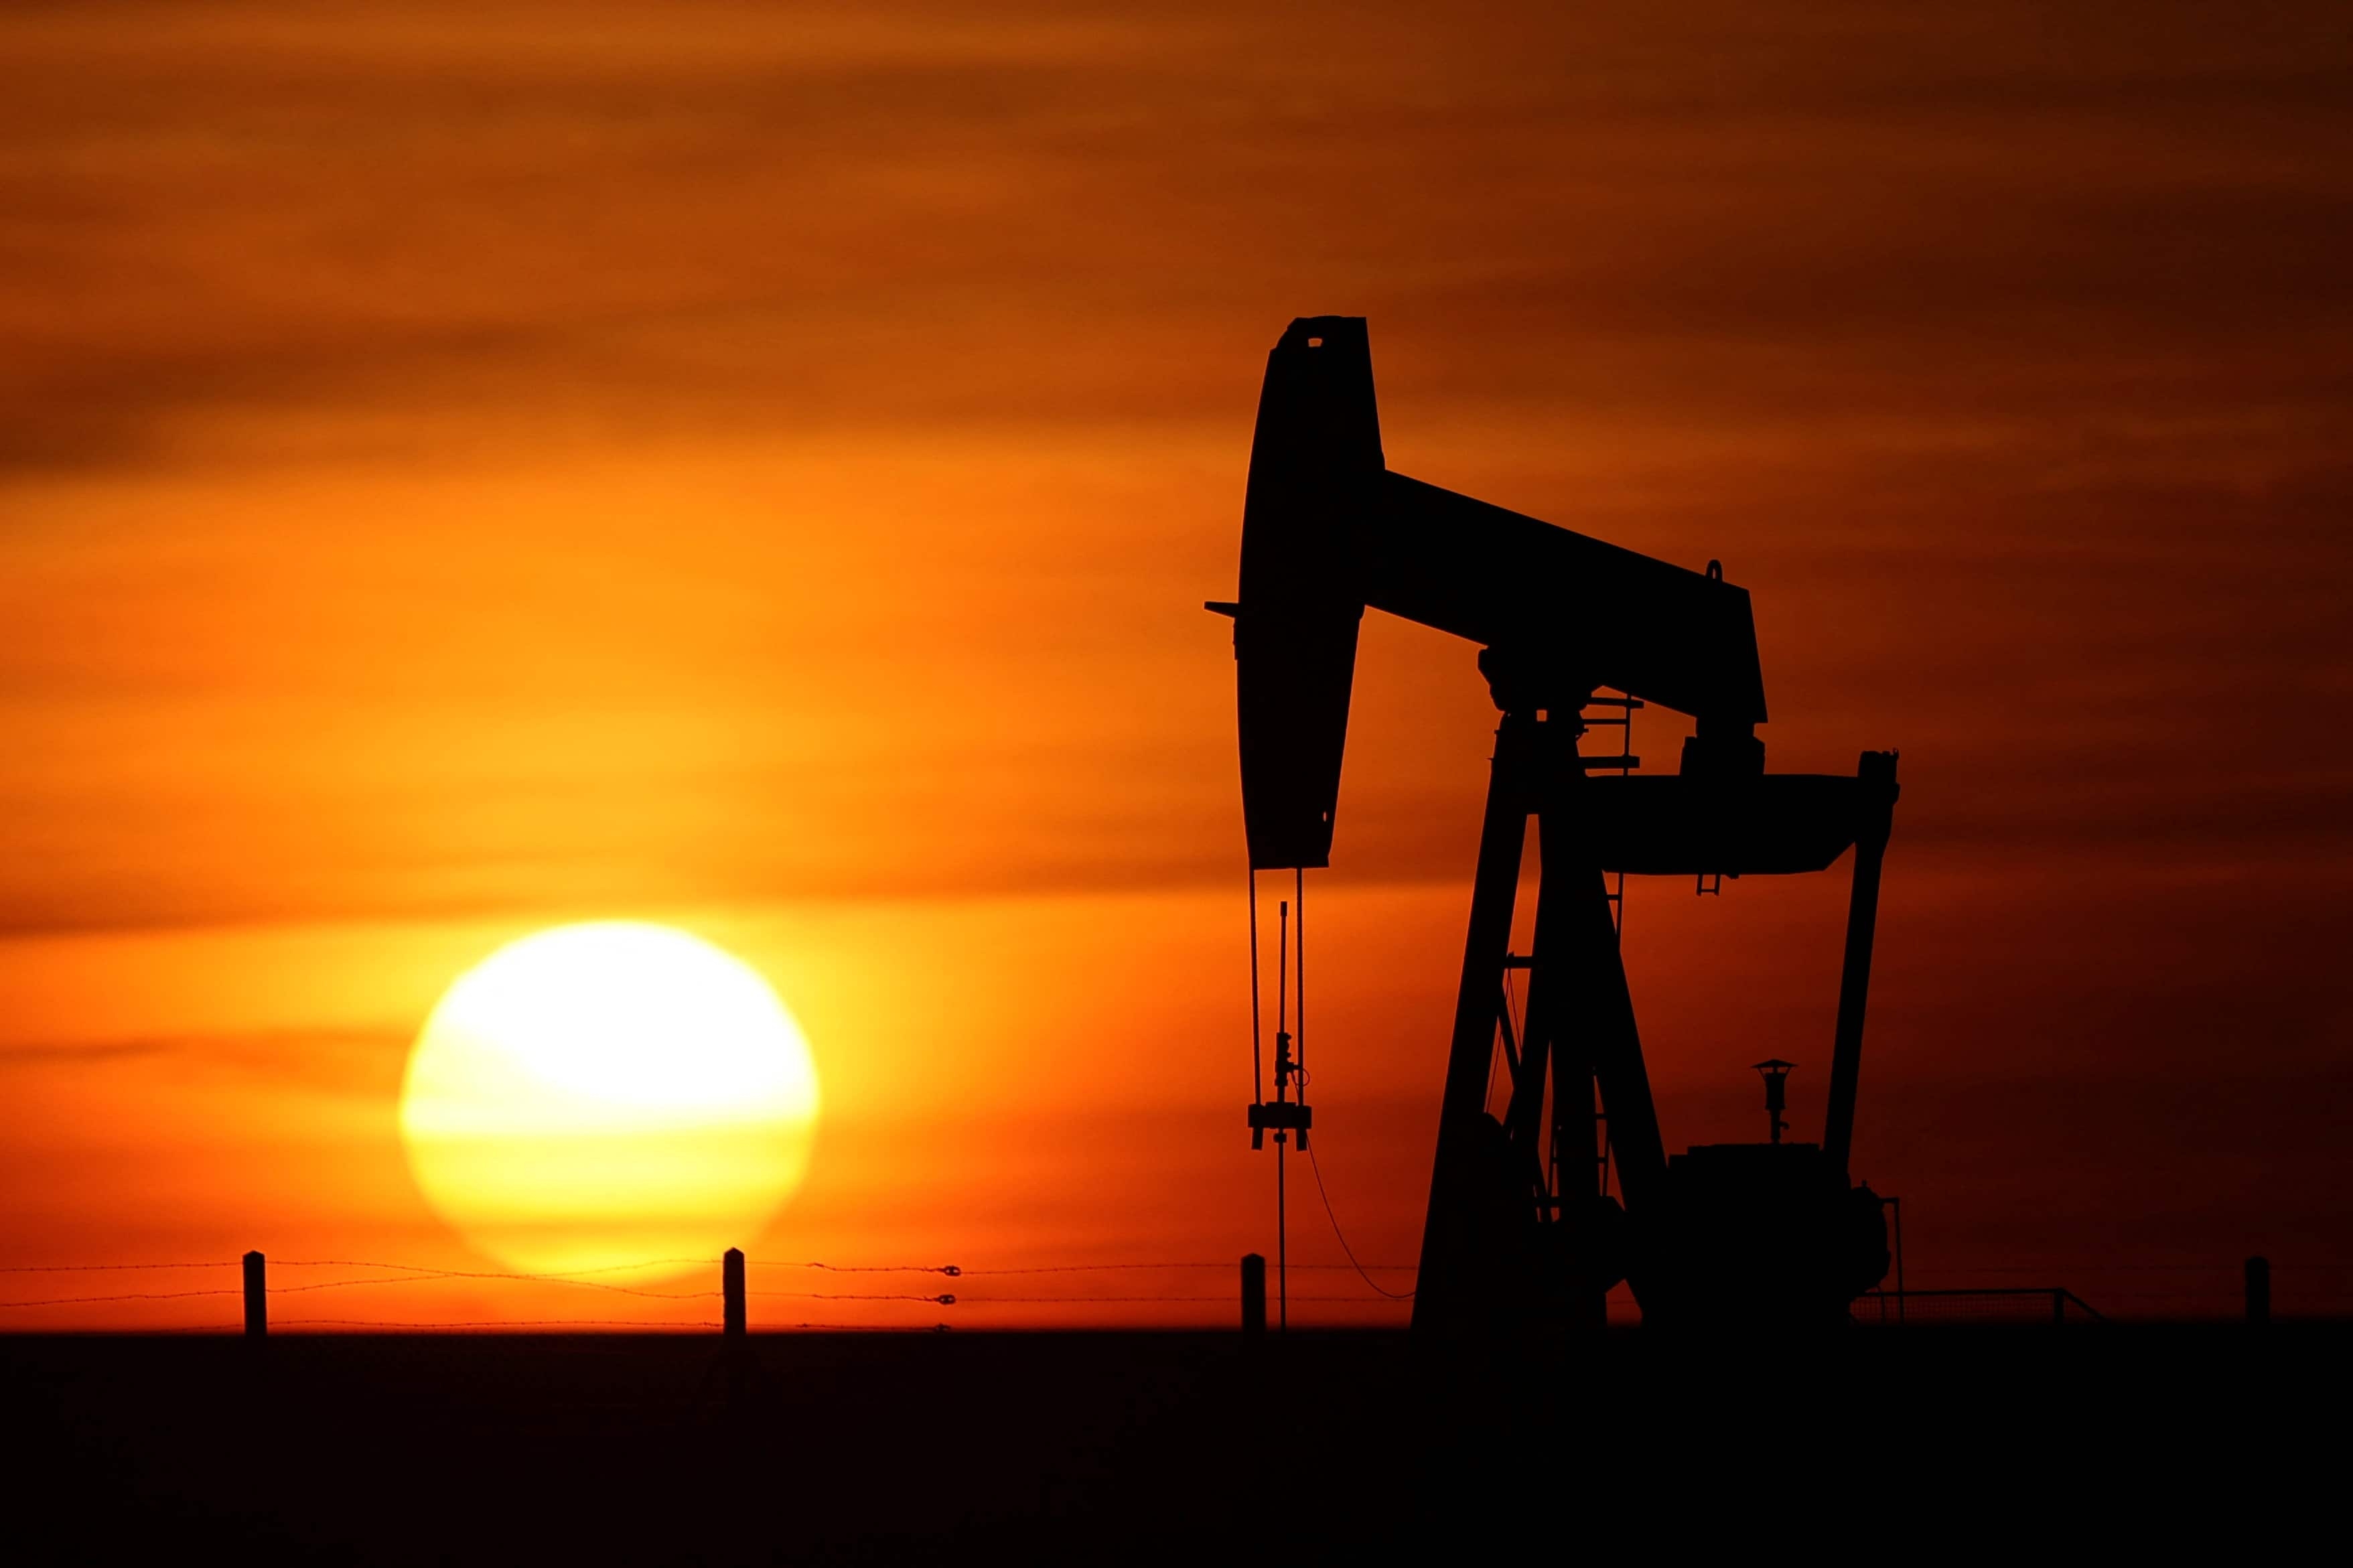 Oil prices dipped at the start of Asian trade on May 6 as worries about an economic downturn that could dampen demand for crude vied with concerns over new sanctions from the European Union against Russia, including an embargo on crude oil. Brent futures fell 37 cents, or 0.3 percent, to $110.53 a barrel by 0015 GMT, while US West Texas Intermediate (WTI) crude fell 33 cents, or 0.3 percent, to $107.93 a barrel.